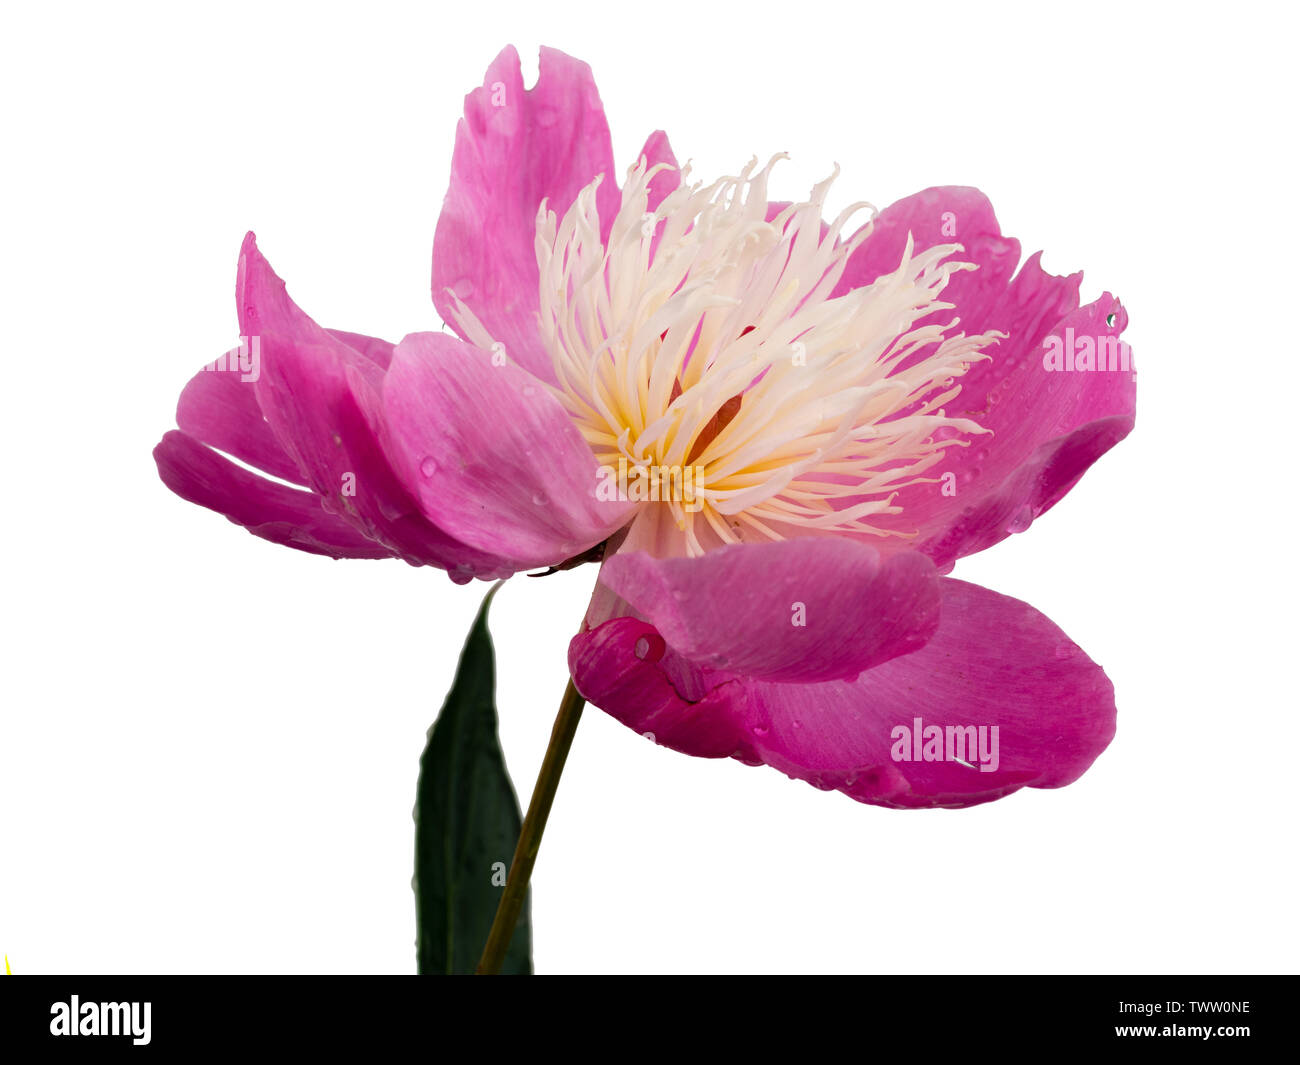 White centred pink peony, Paeonia 'Bowl of Beauty' flower on a white background Stock Photo